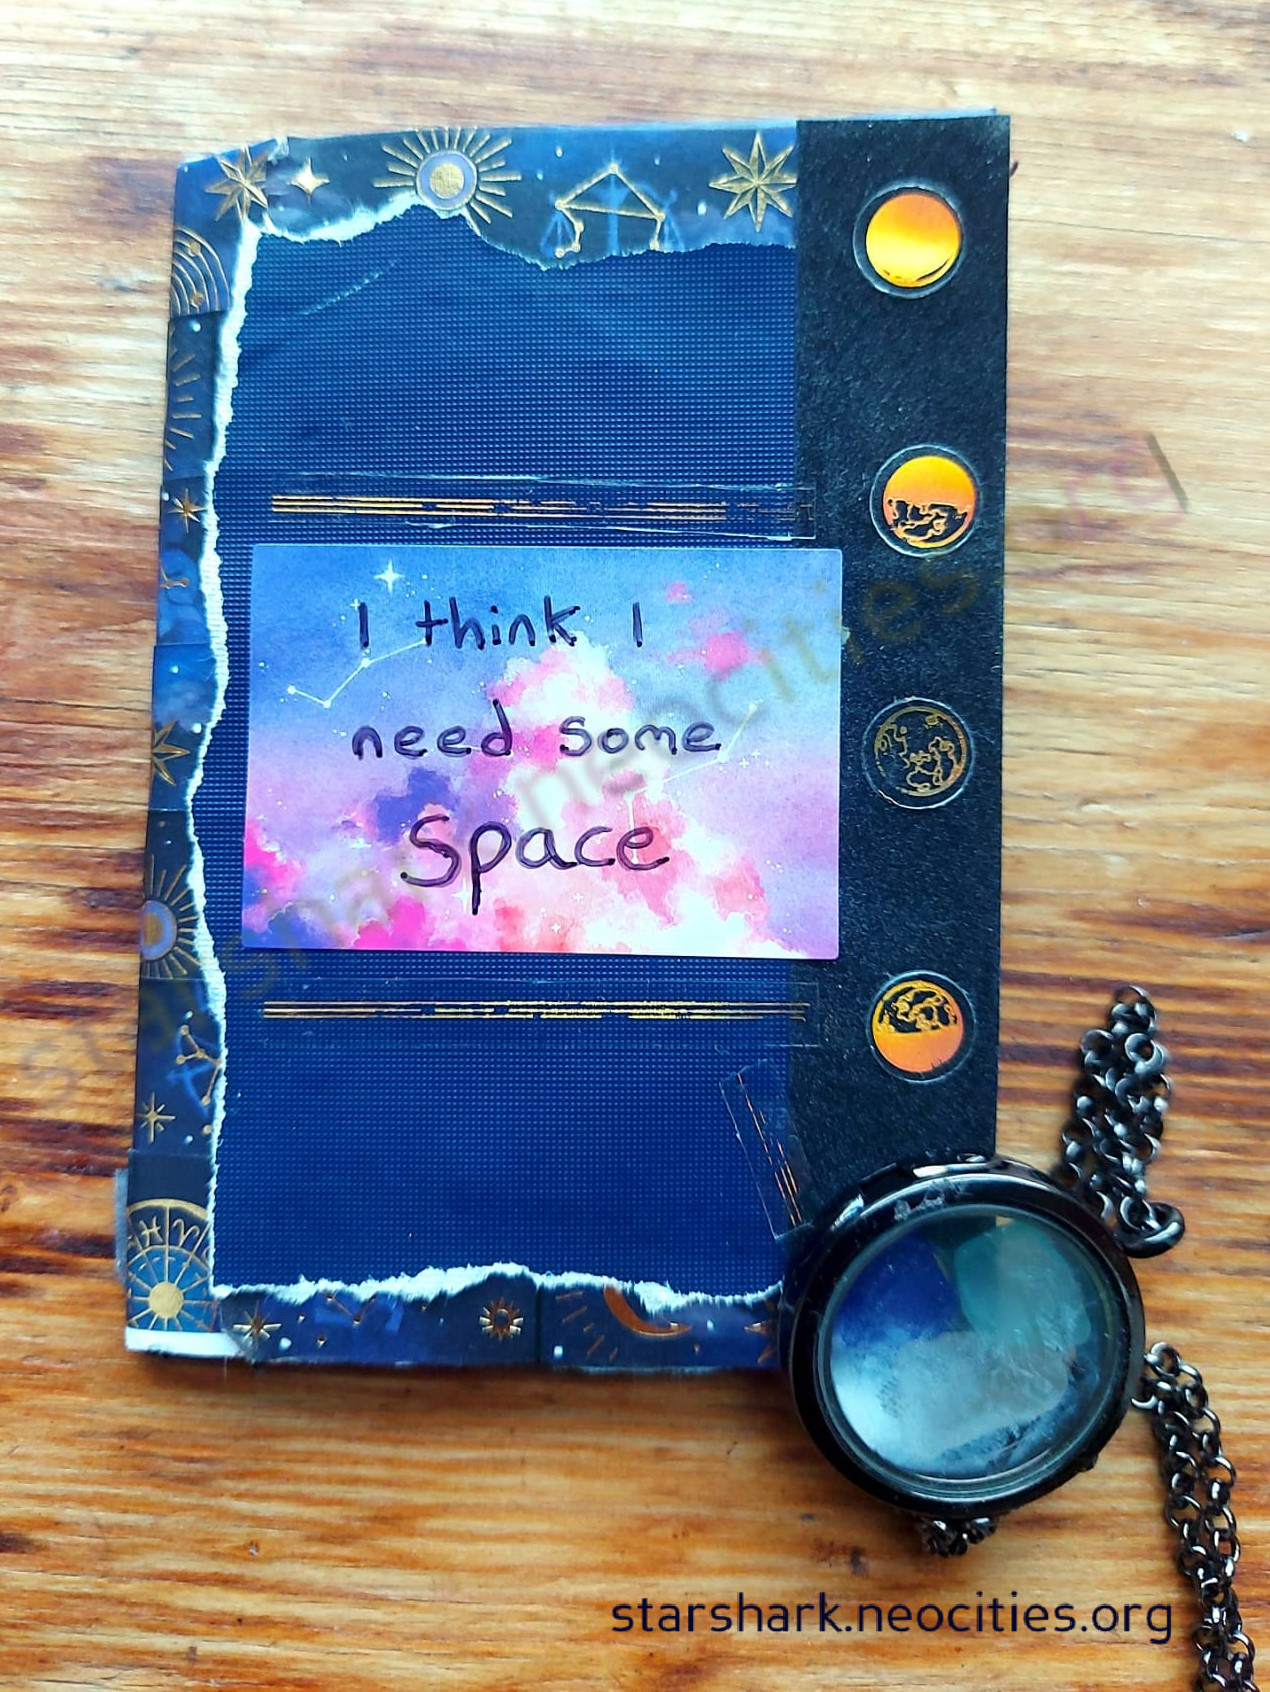 the front cover of a mini-zine. It reads 'I think I need some Space'.